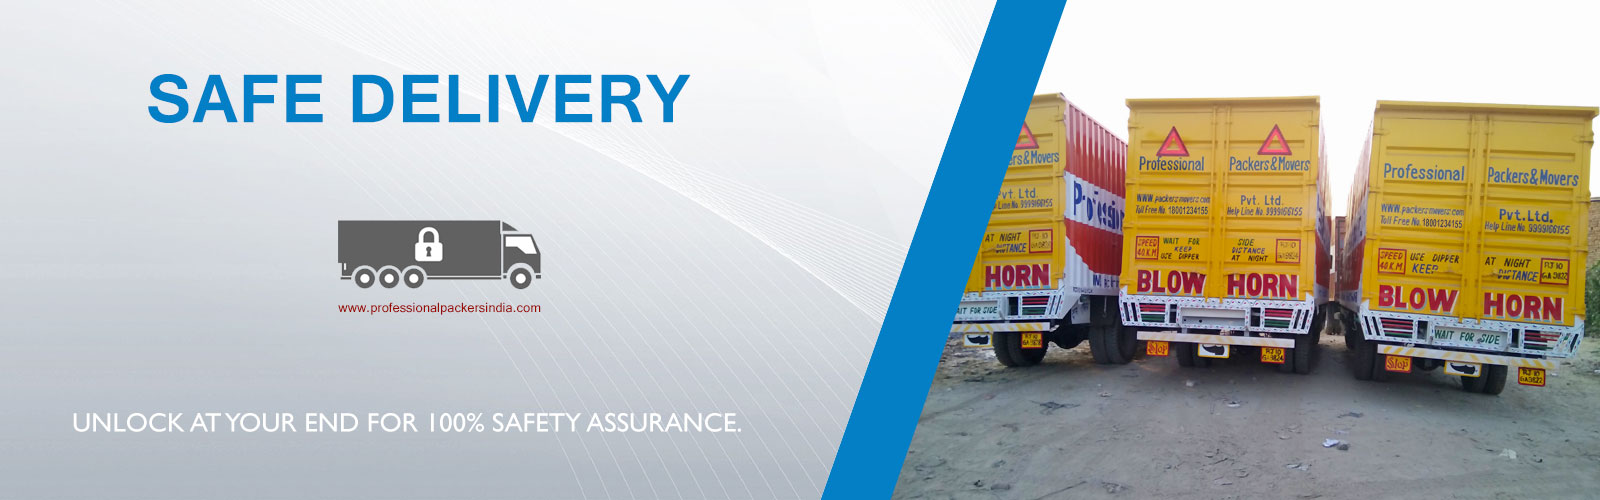 Packers and Movers in Thane, Professional gives you wide end-to-end coordinations and world-class transportation services. Our very much outfitted office at Thane underpins the skillful packing and moving to all customers in Thane and nearby places.